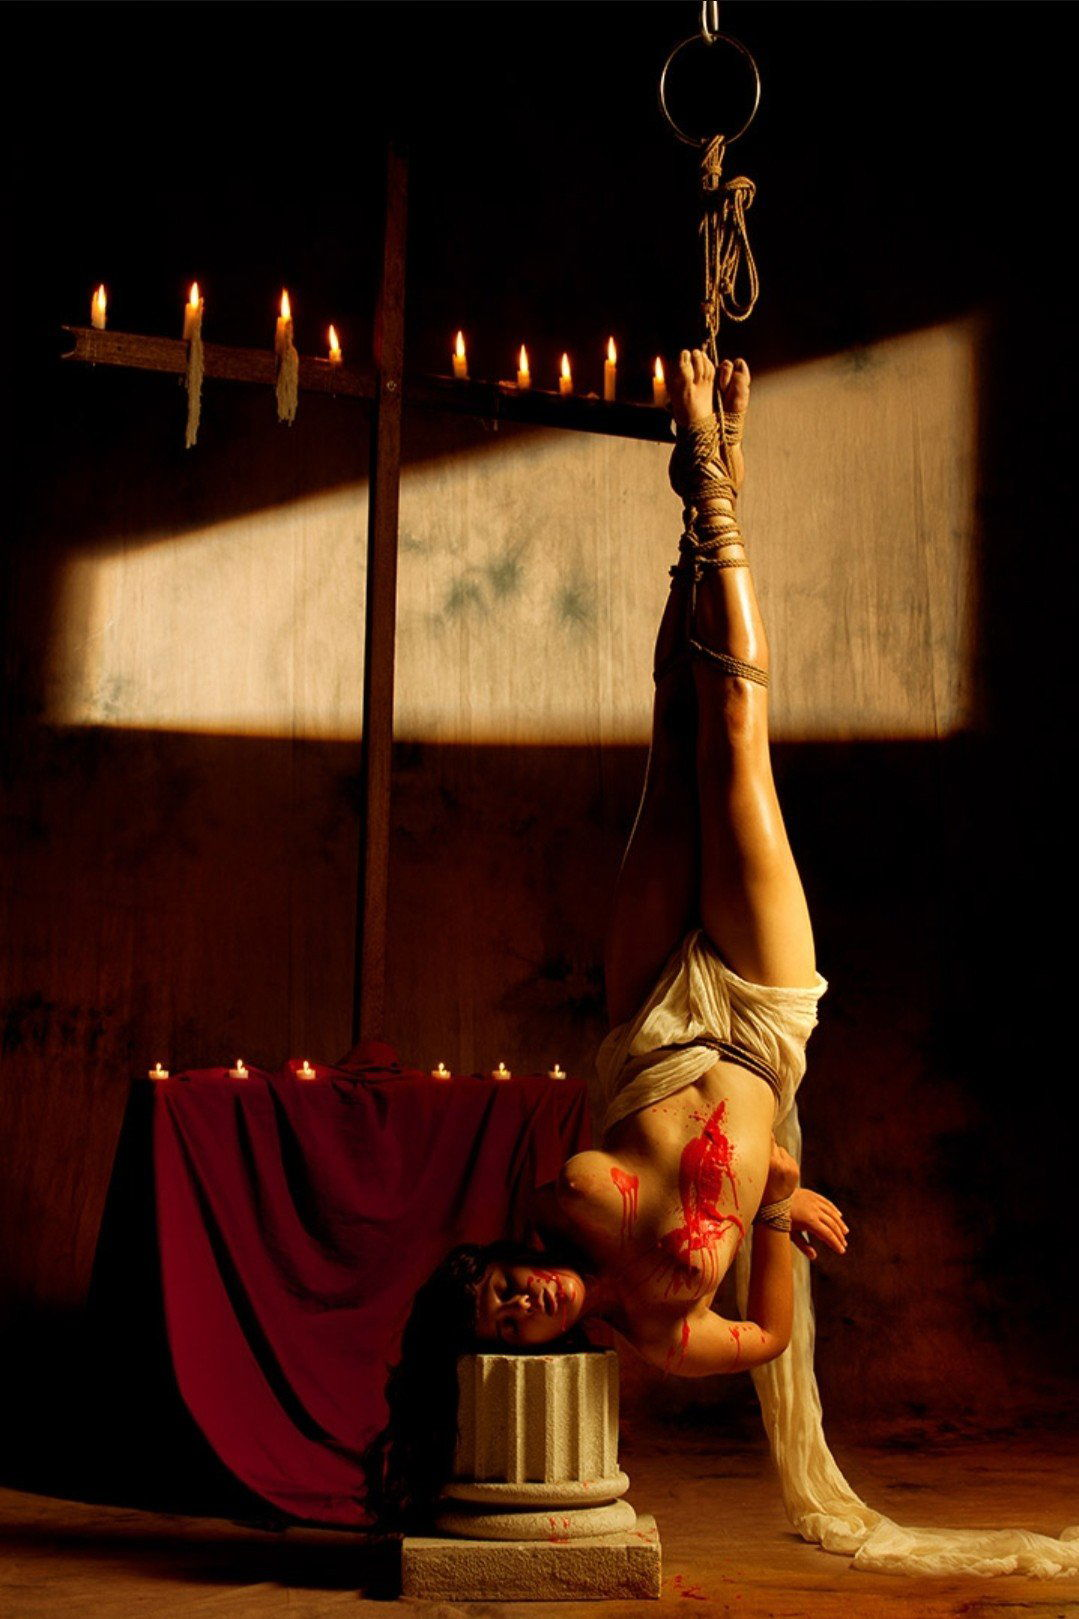 Watch the Photo by Sumles with the username @Sumles, posted on July 9, 2023. The post is about the topic Slavegirl. and the text says '#slavegirl #bondage #tied #tiedgirl #shibari #artistic #suspended #femininebeauty #sensual #perfect #fly #ropebunny #submissive #slave #bdsm #longhair #beautiful #beauty #naked #helpless #sub  #puppet #girl #undressed #onherknees #roman #woodhorse..'